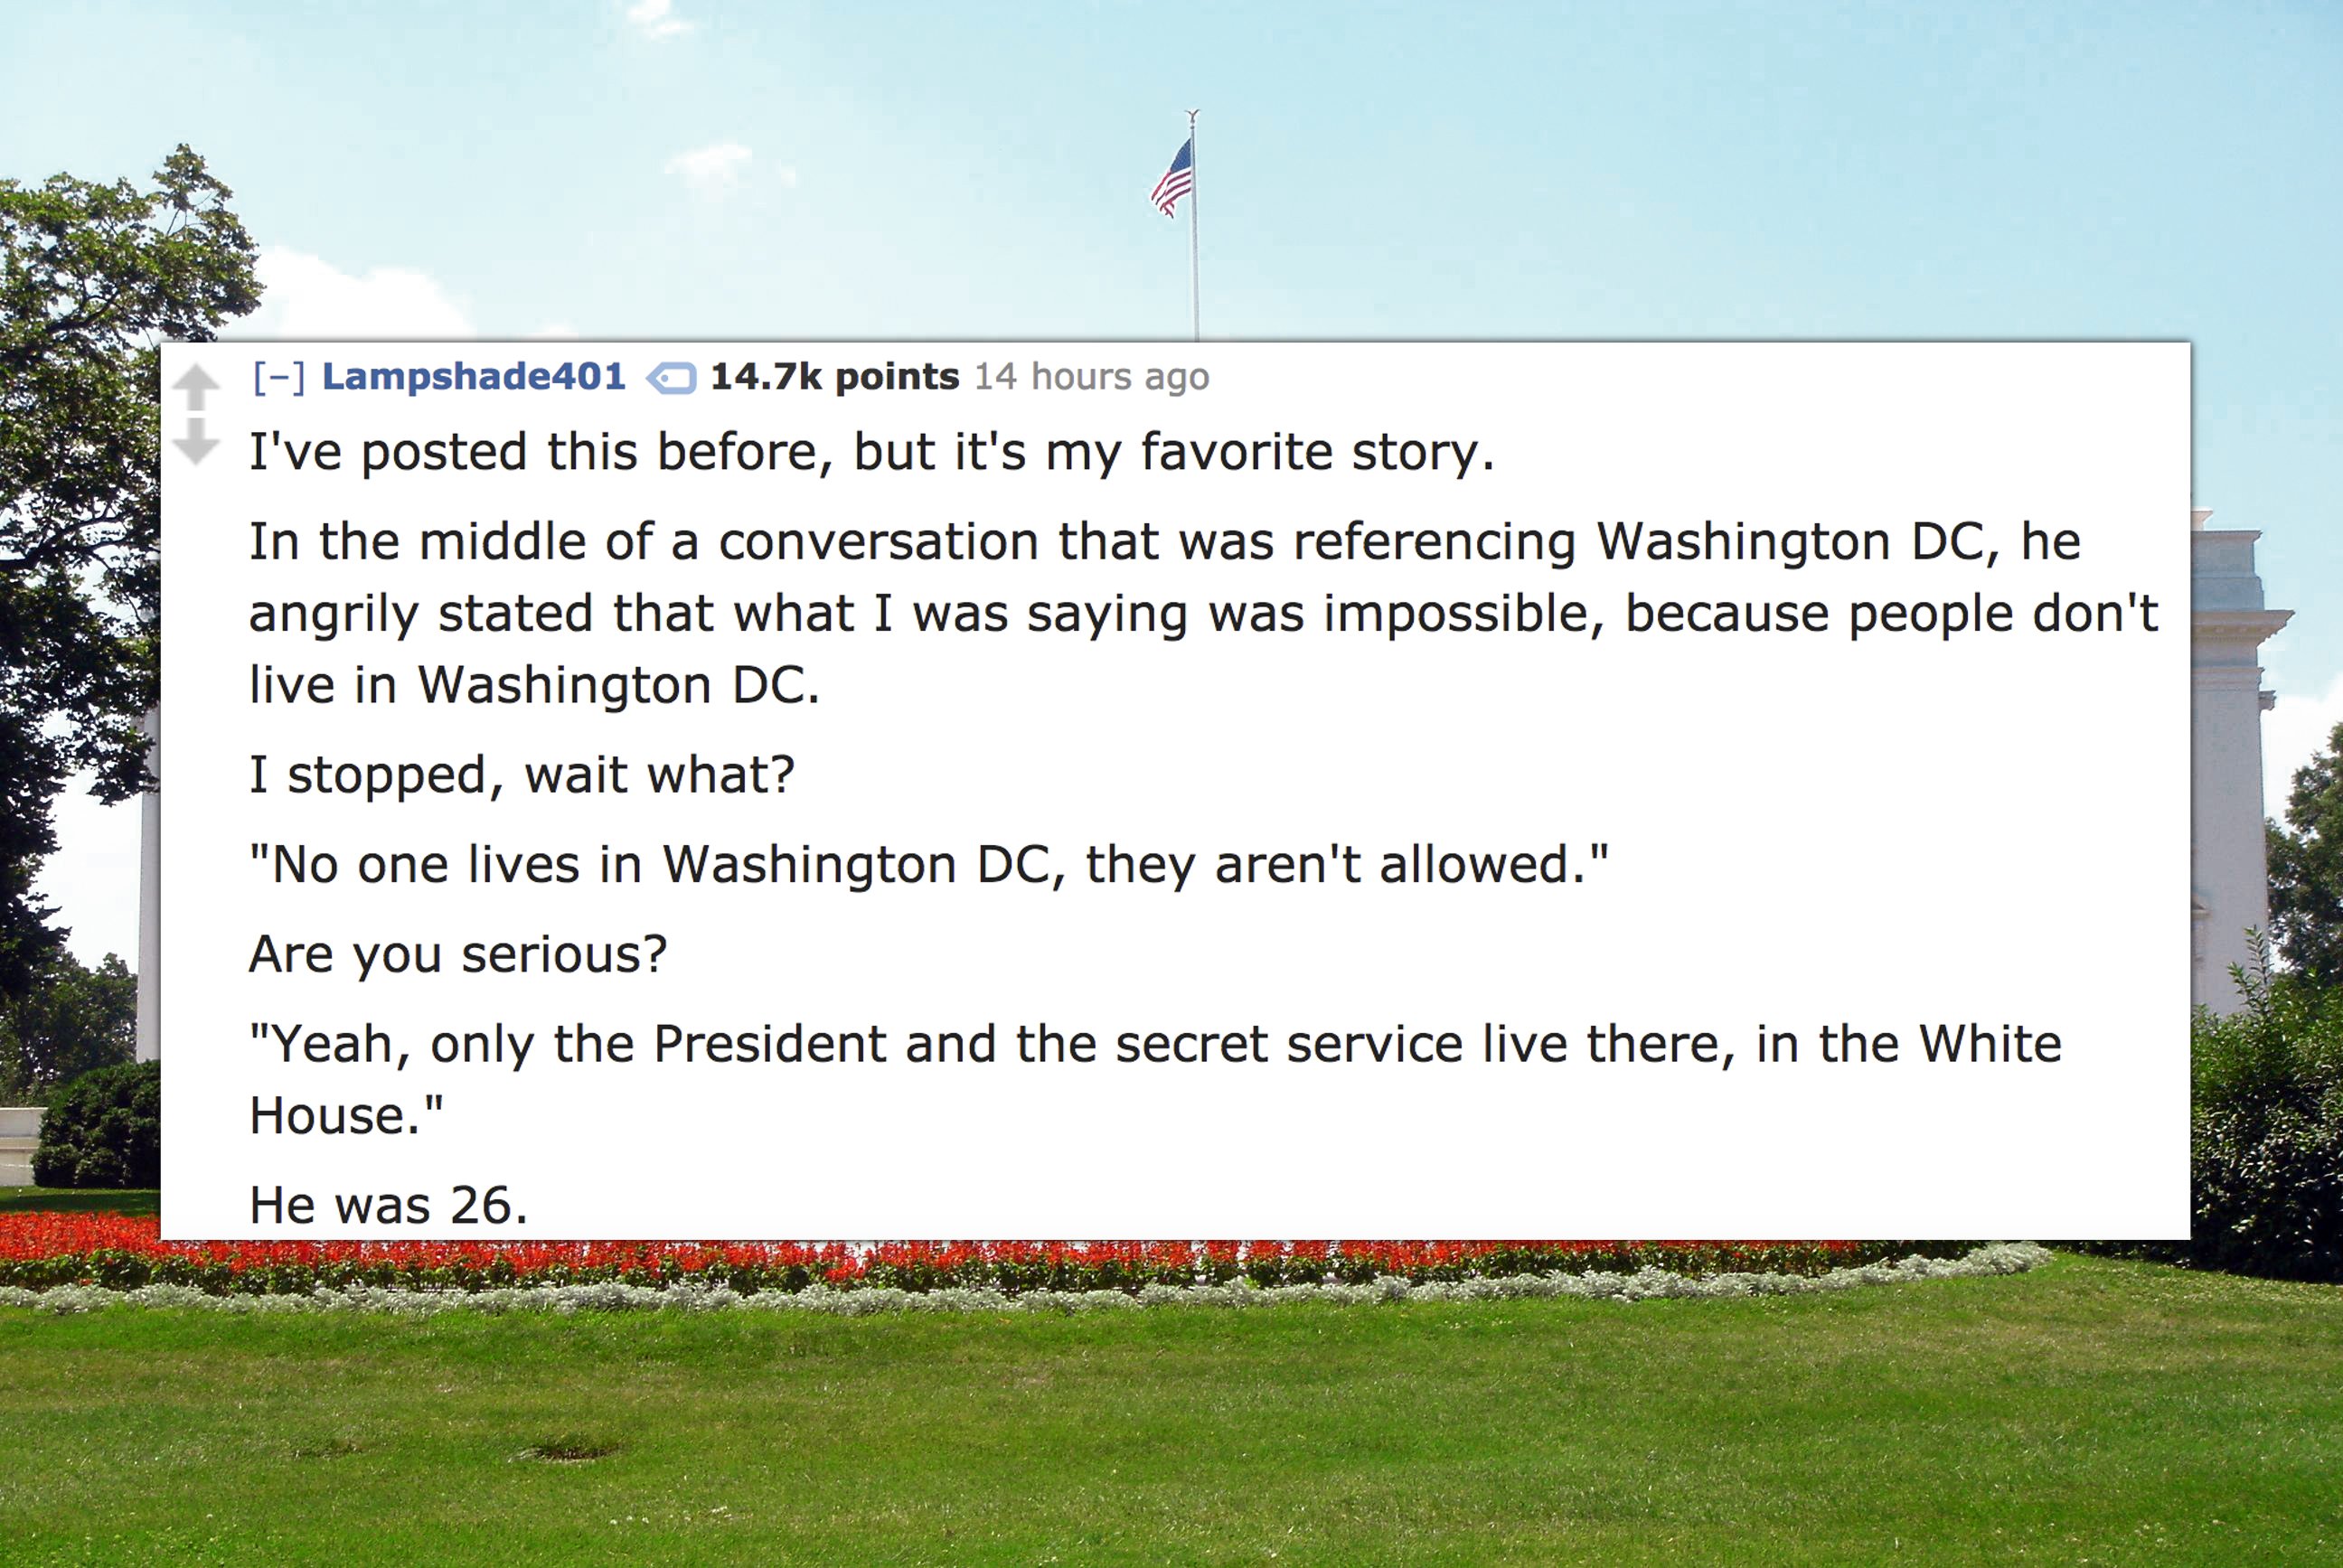 white house - Lampshade401 points 14 hours ago I've posted this before, but it's my favorite story. In the middle of a conversation that was referencing Washington Dc, he angrily stated that what I was saying was impossible, because people don't live in W